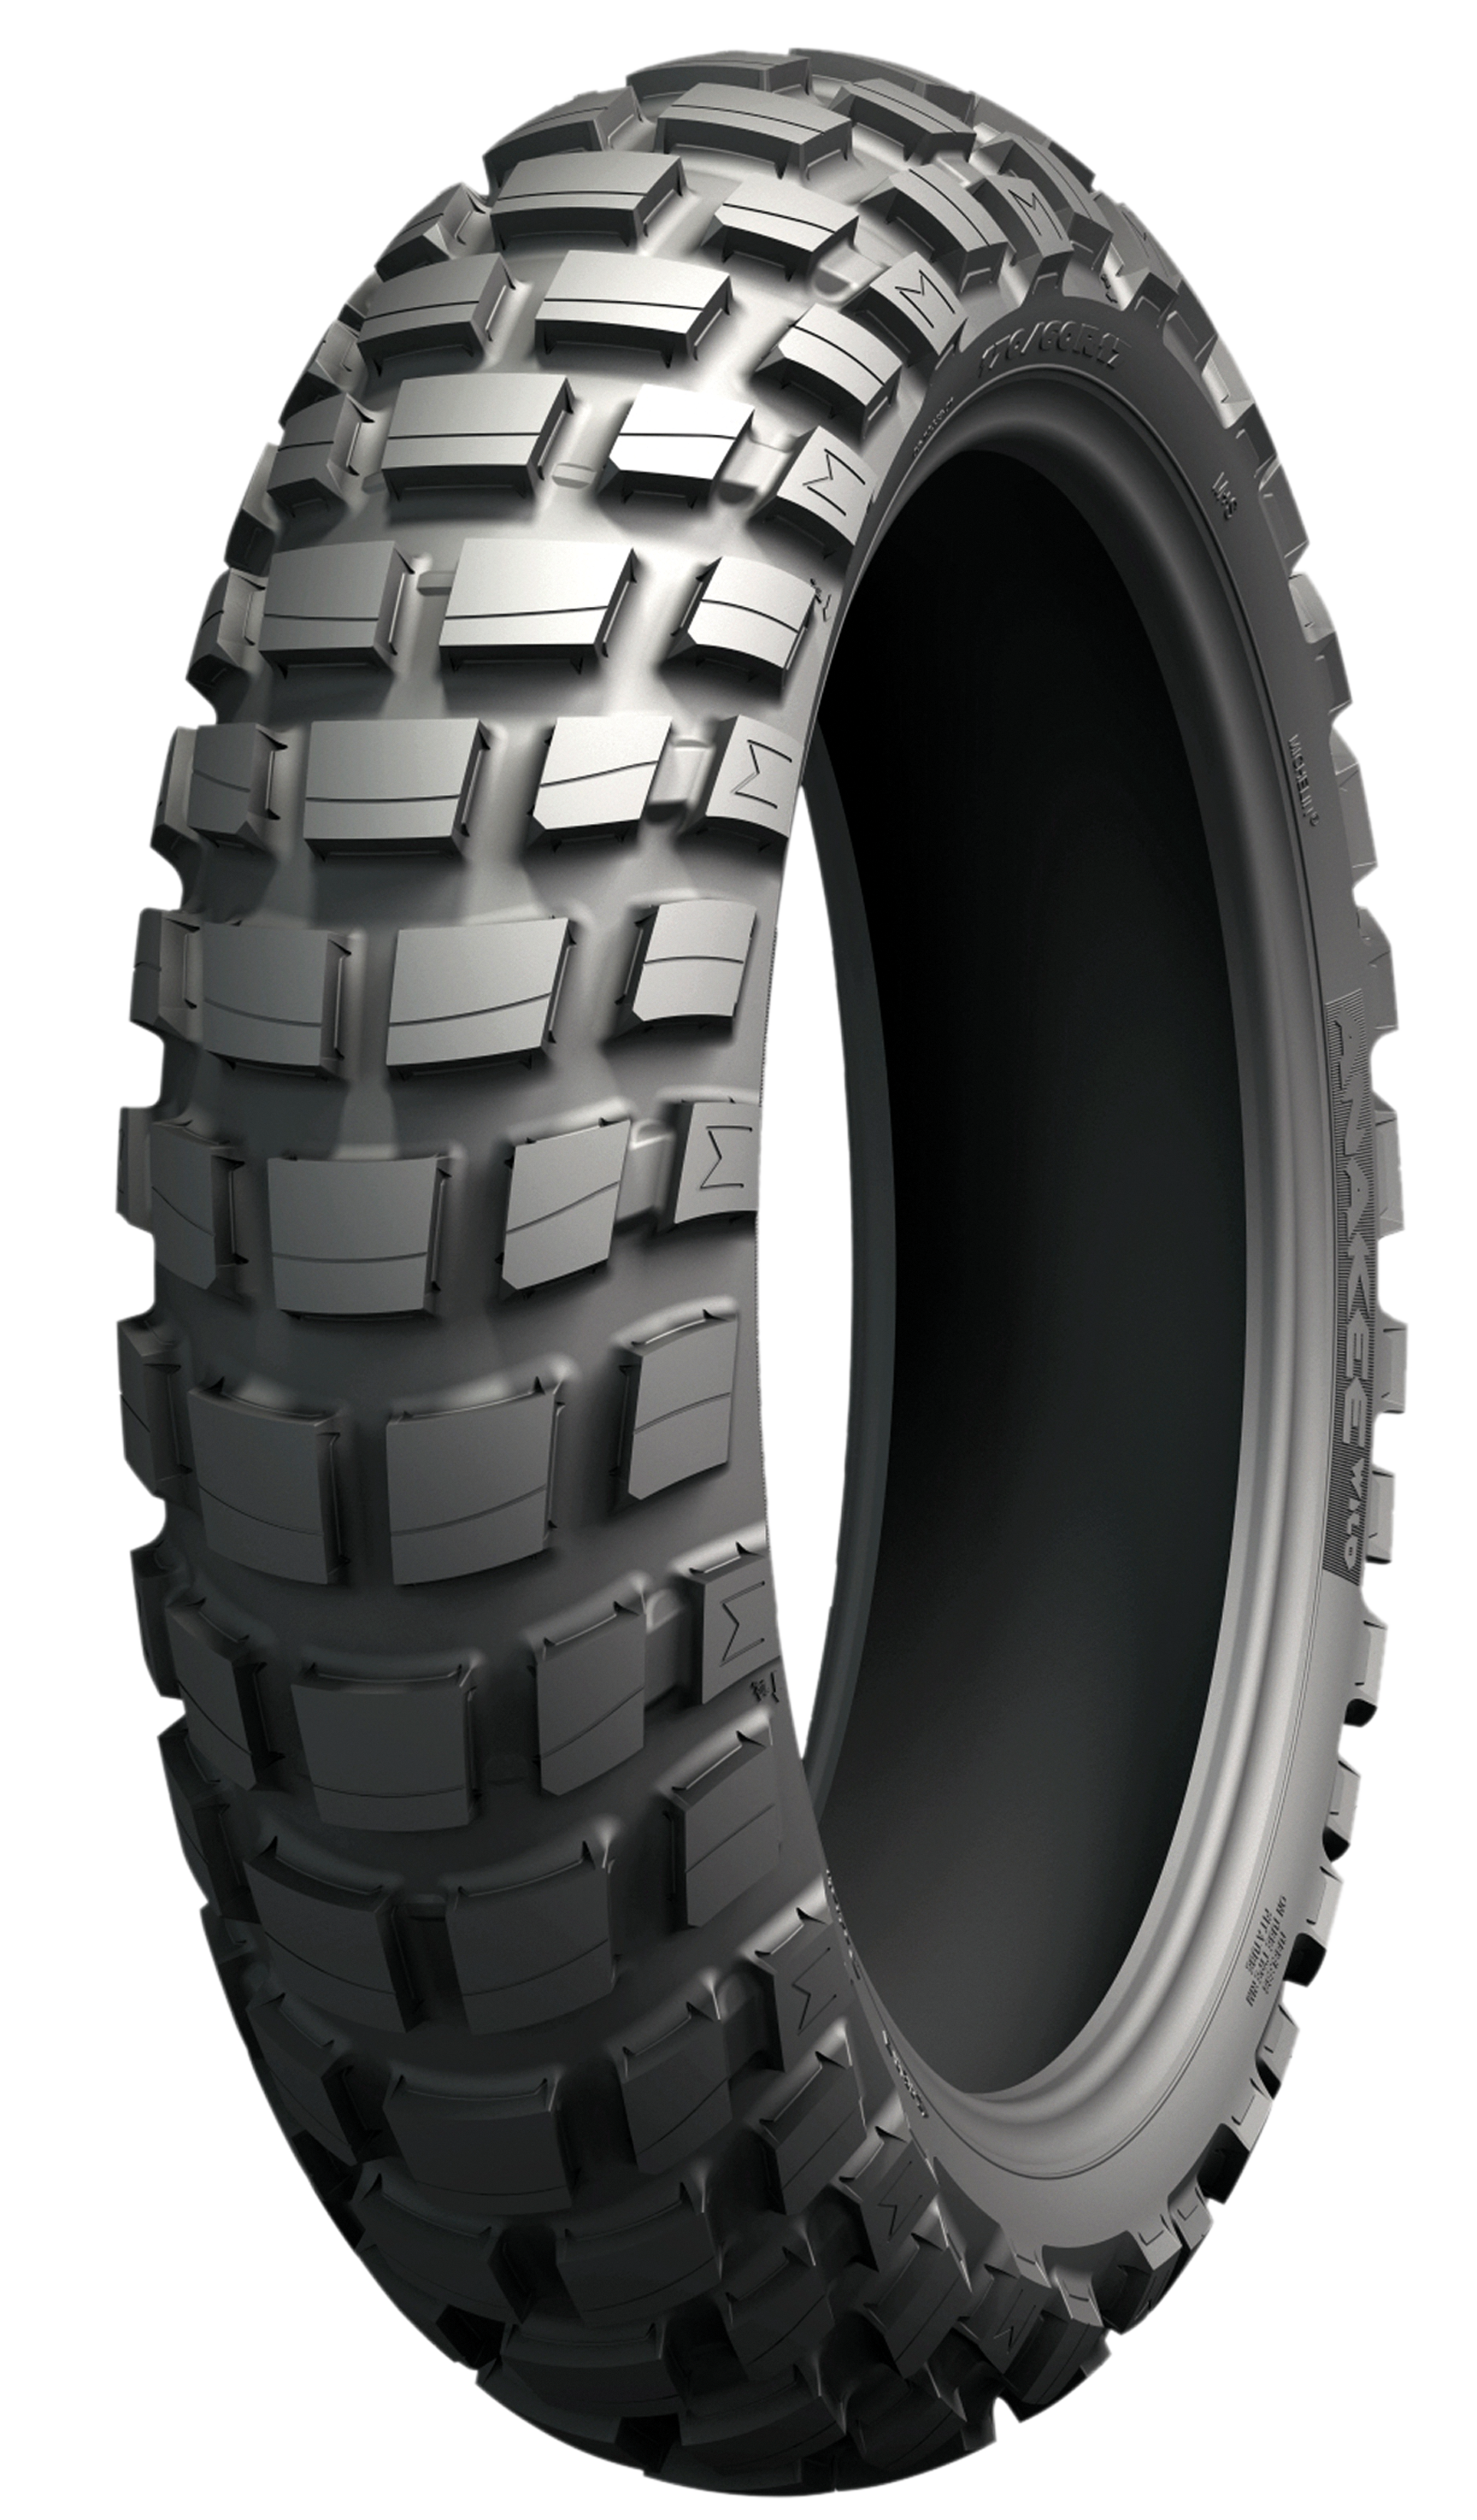 Anvelopa michelin anakee wild spate 130/80-18 65s